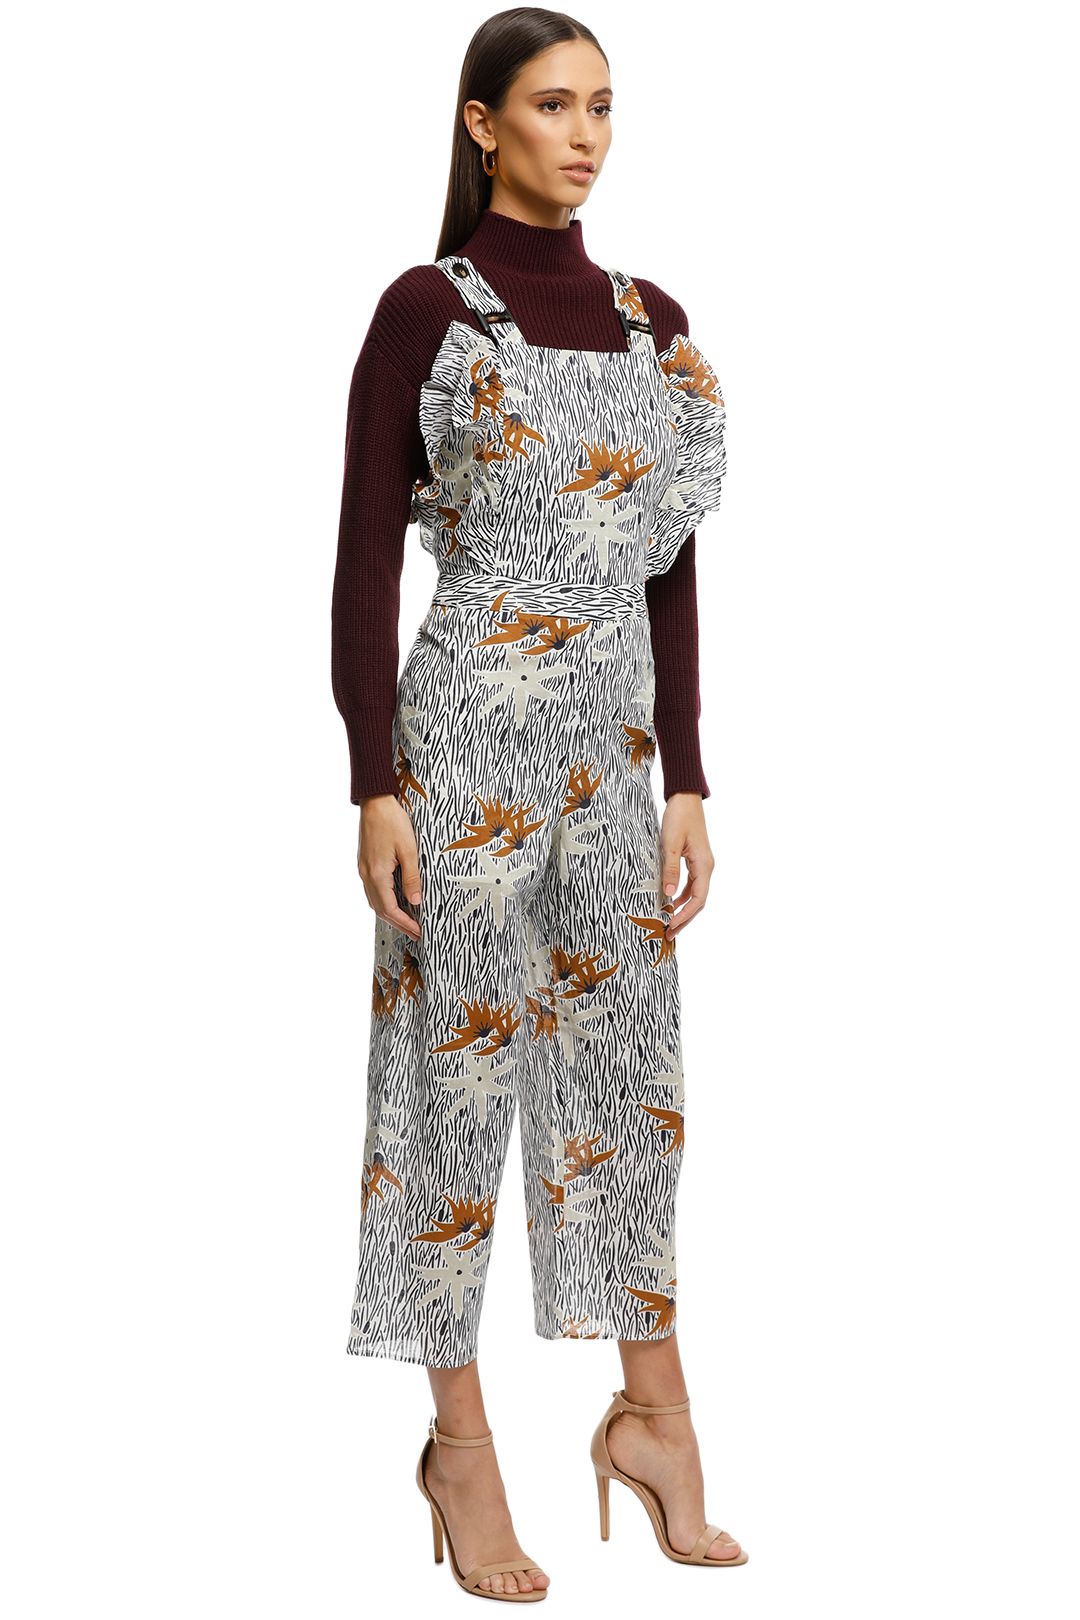 Stevie-May-Wayfaring-Jumpsuit-Bamboo-Floral-Side